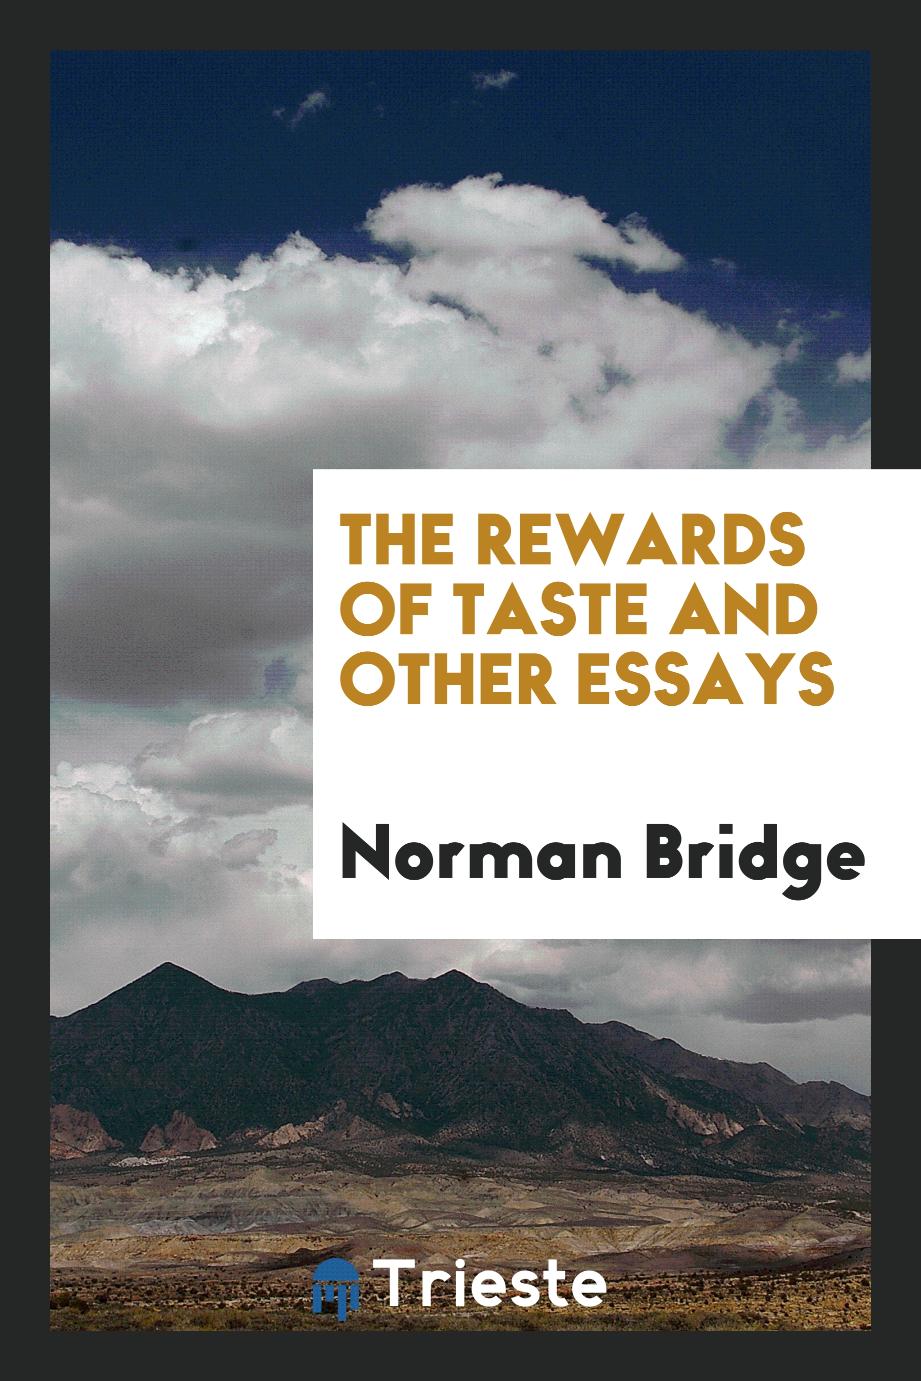 The rewards of taste and other essays